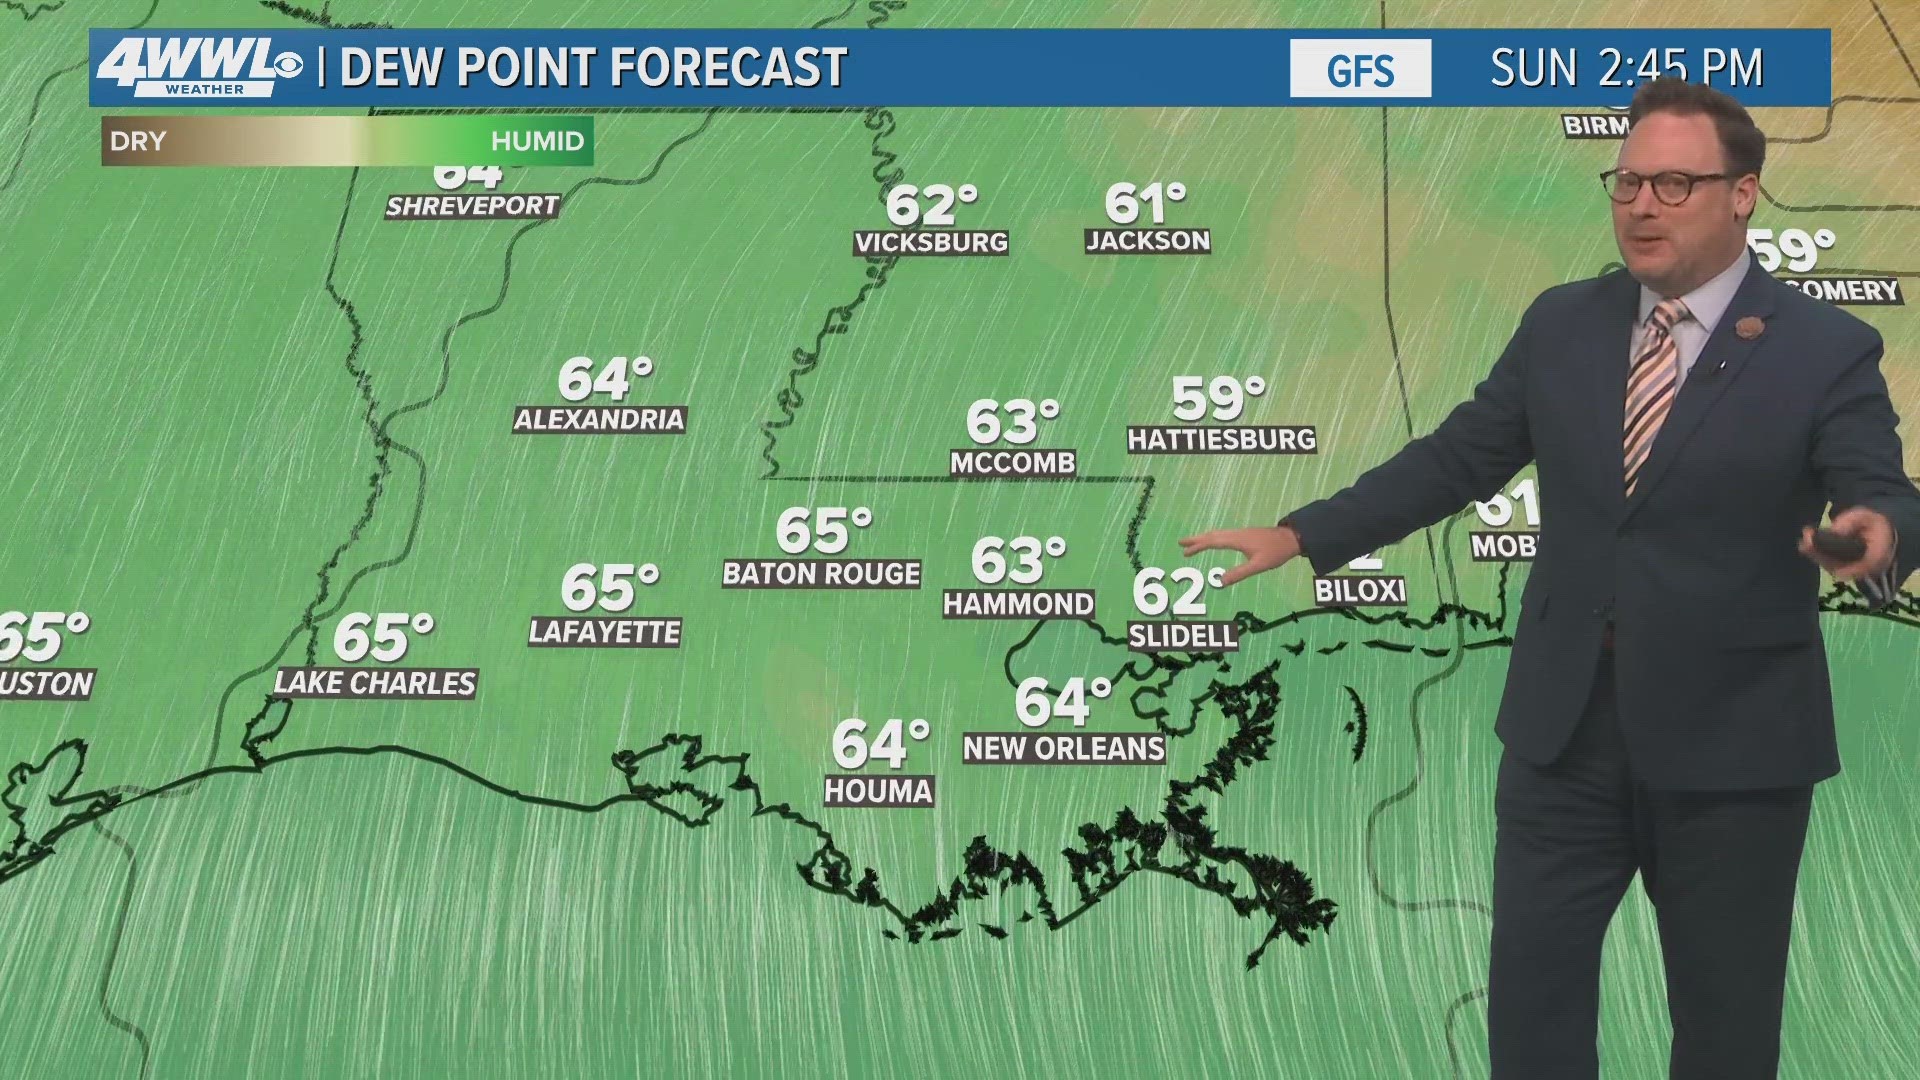 Chief Meteorologist Chris Franklin says gradually more humid air will return through the Easter weekend and early next week before another cold front sweeps through.